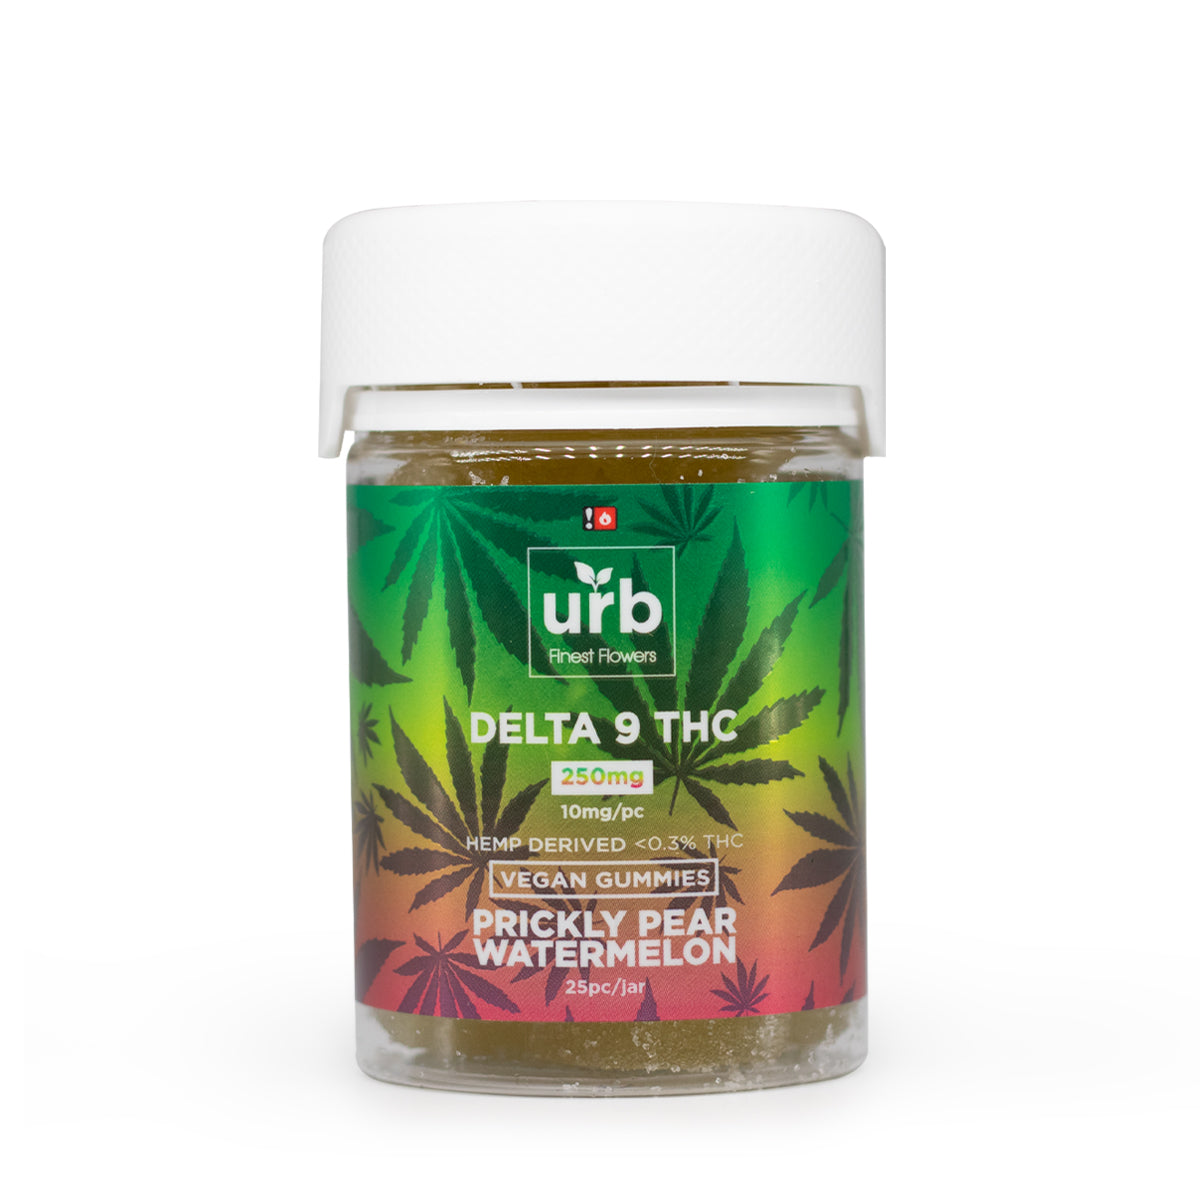 Urb Delta 9 THC Gummies 250 MG Prickly Pear Watermelon Gummies yoga smokes yoga studio, delivery, delivery near me, yoga smokes smoke shop, find smoke shop, head shop near me, yoga studio, headshop, head shop, local smoke shop, psl, psl smoke shop, smoke shop, smokeshop, yoga, yoga studio, dispensary, local dispensary, smokeshop near me, port saint lucie, florida, port st lucie, lounge, life, highlife, love, stoned, highsociety. Yoga Smokes Prickly Pear Watermelon